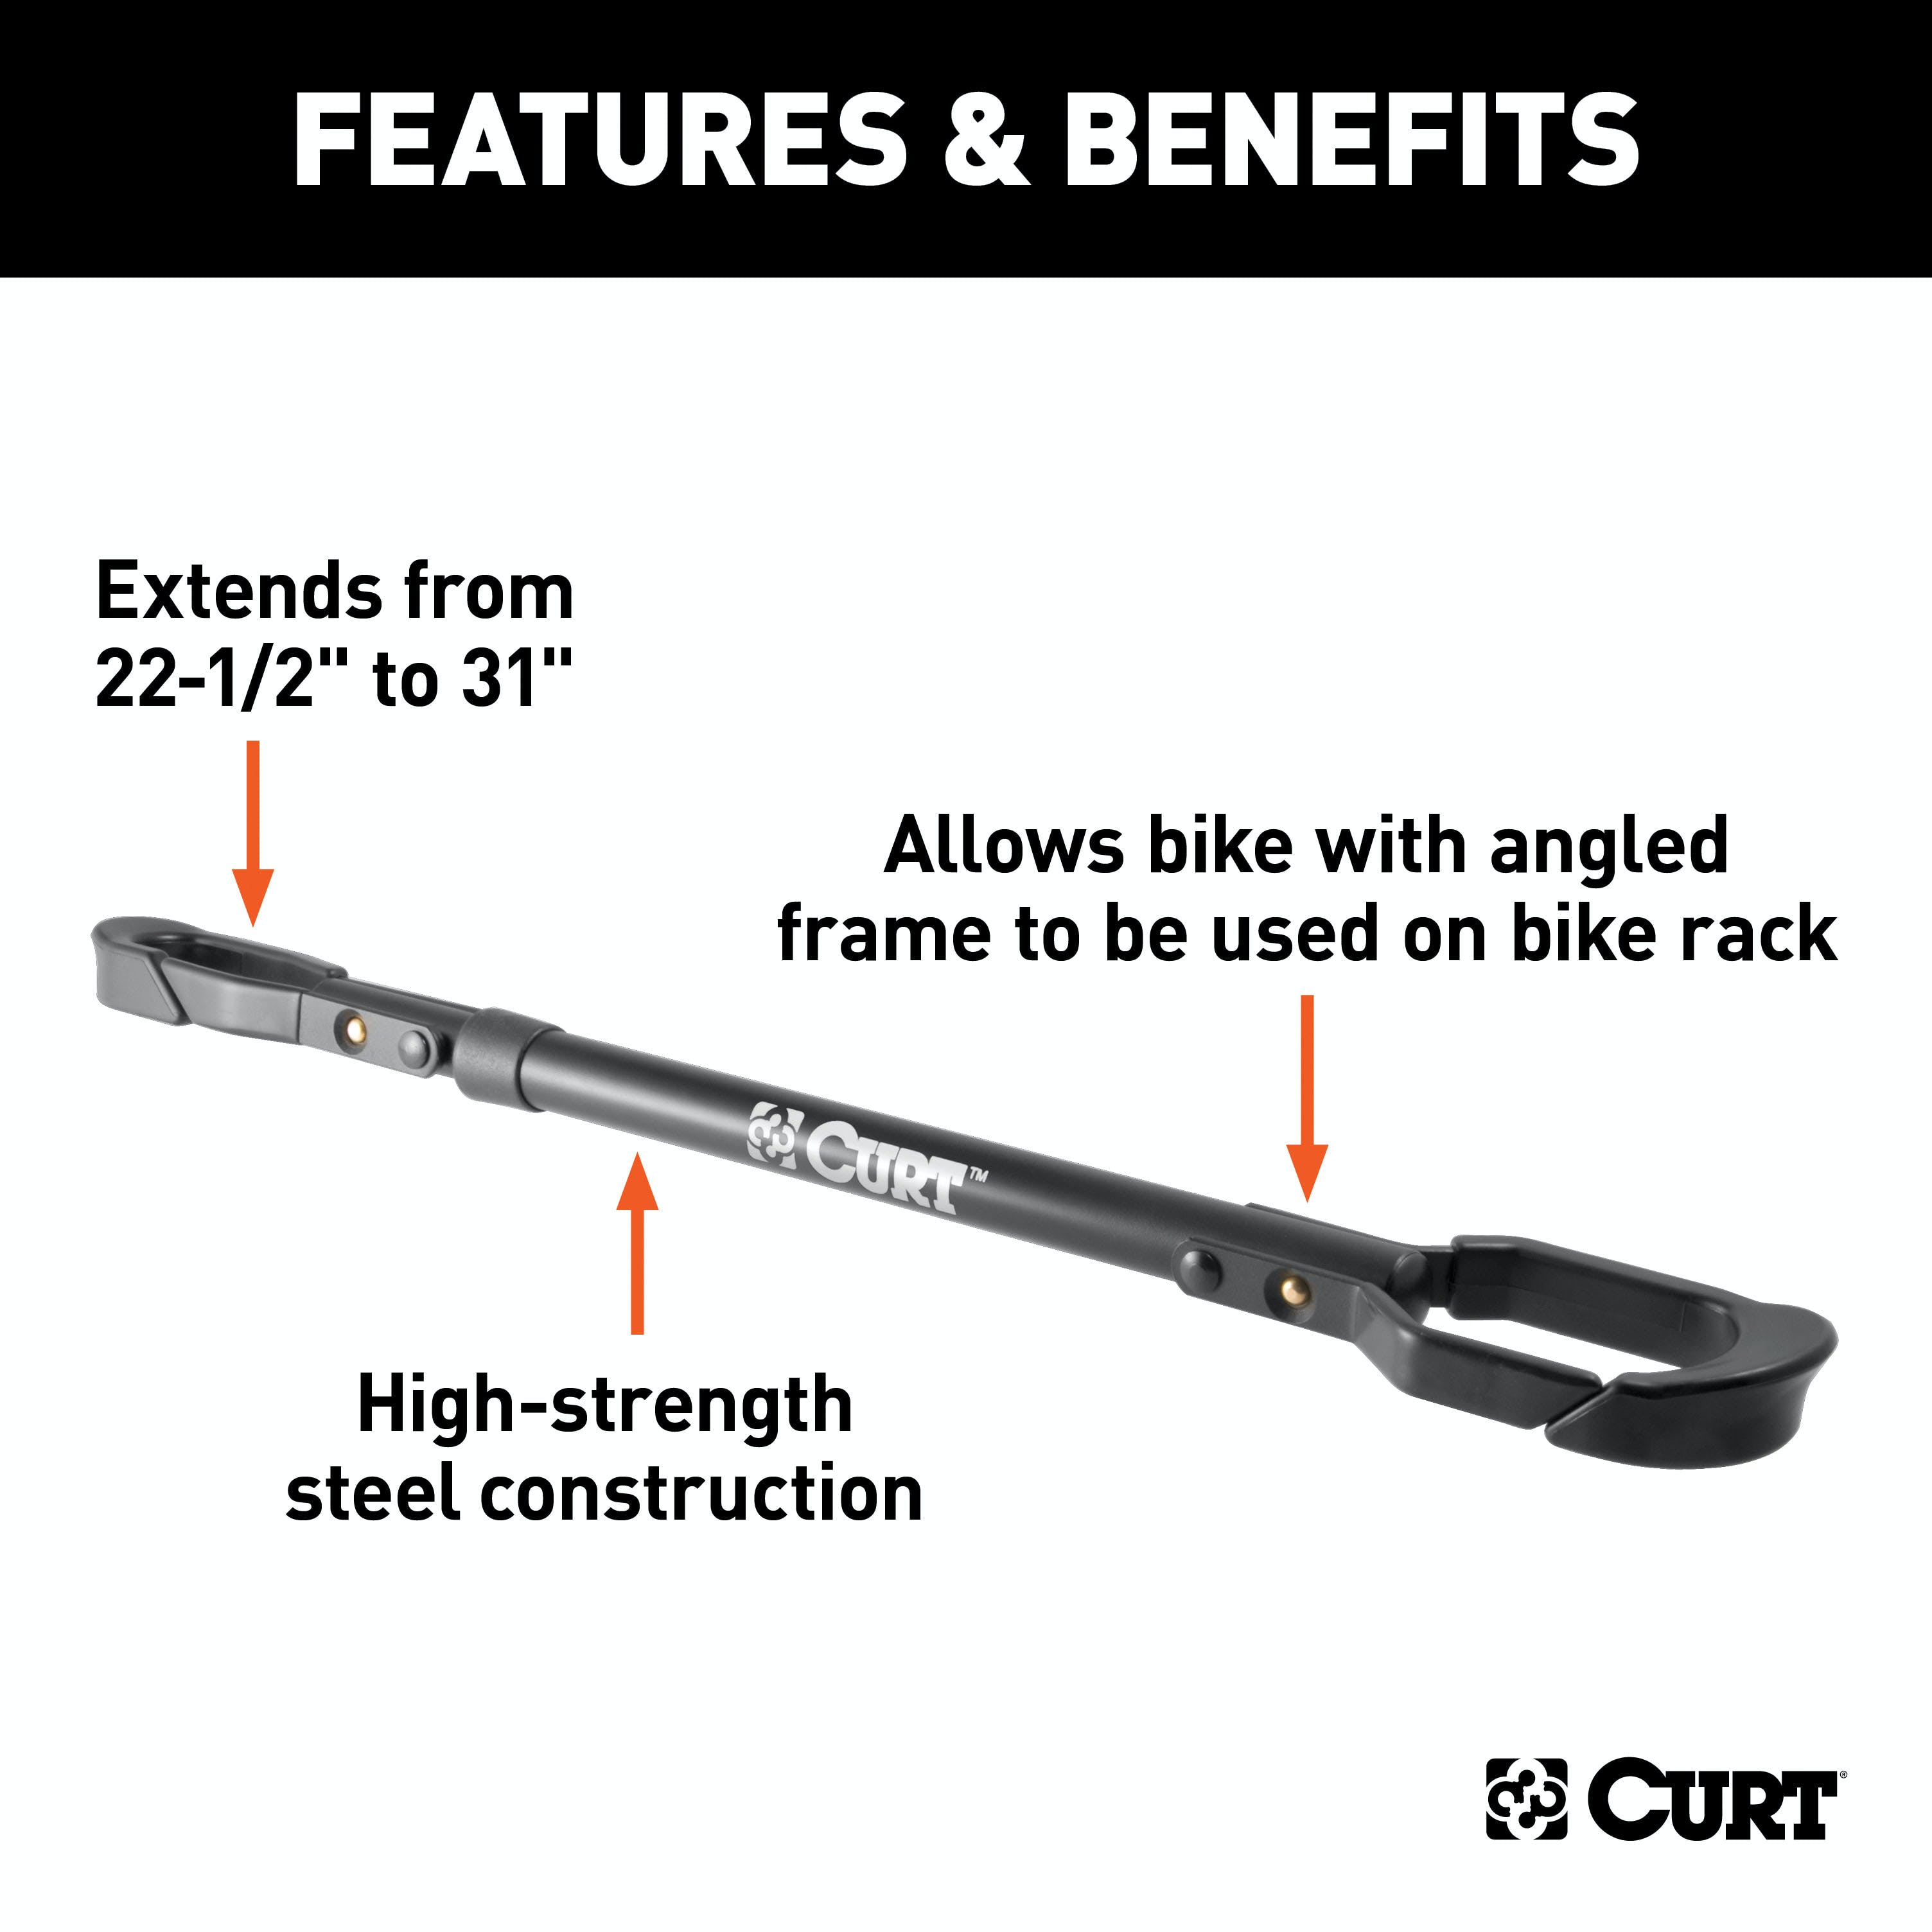 CURT 18016 22-1/2 to 31 Adjustable Bike Adapter Beam for Angled Frames